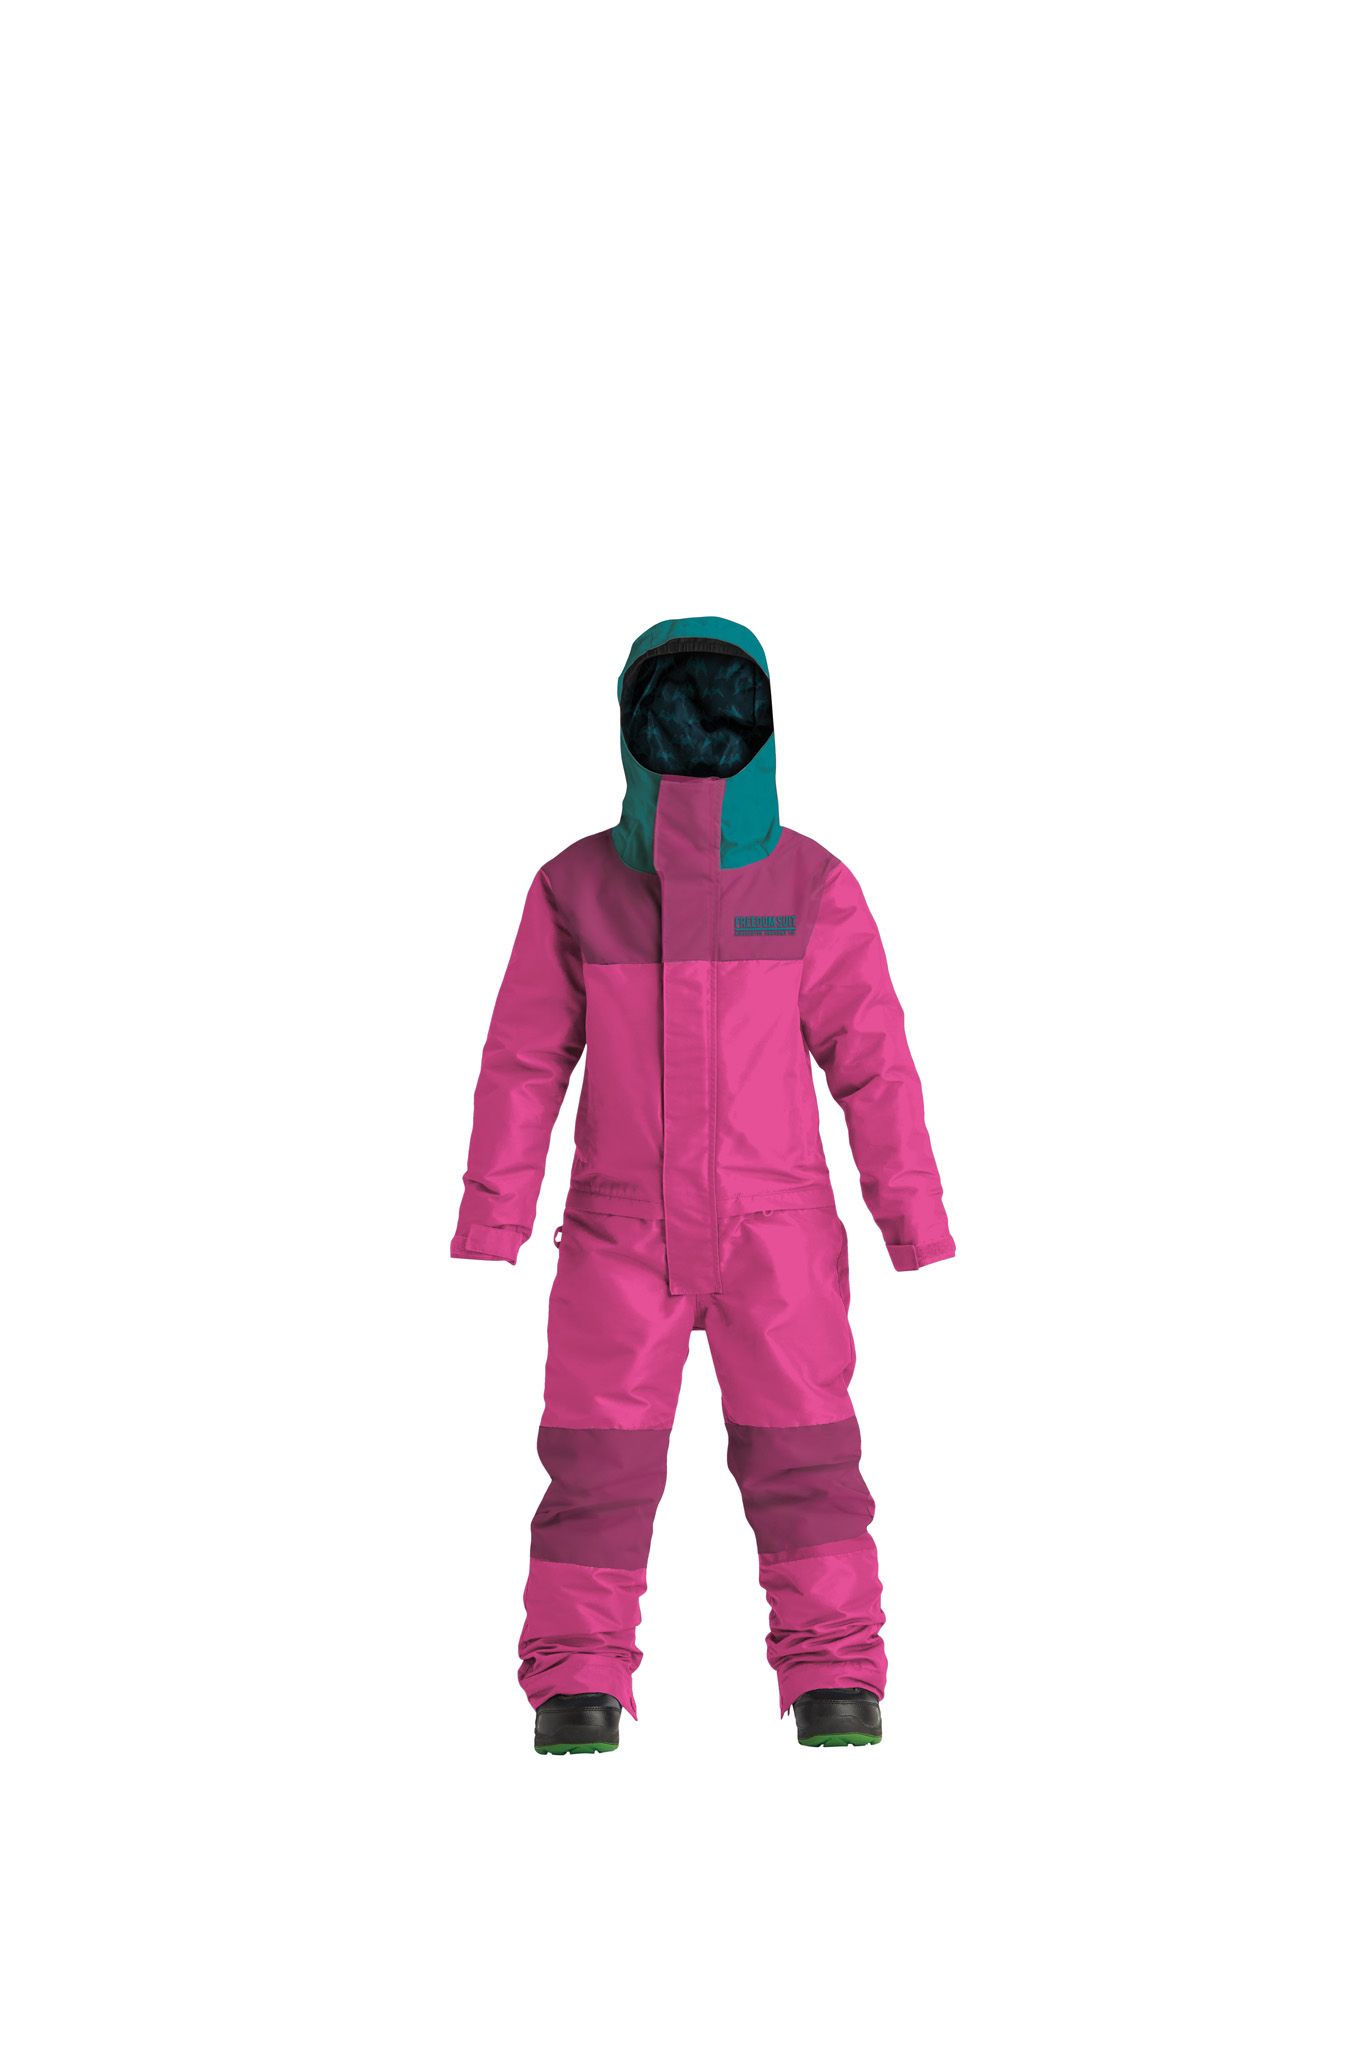 Airblaster Youth Freedom Suit-hot snowboardpak pink